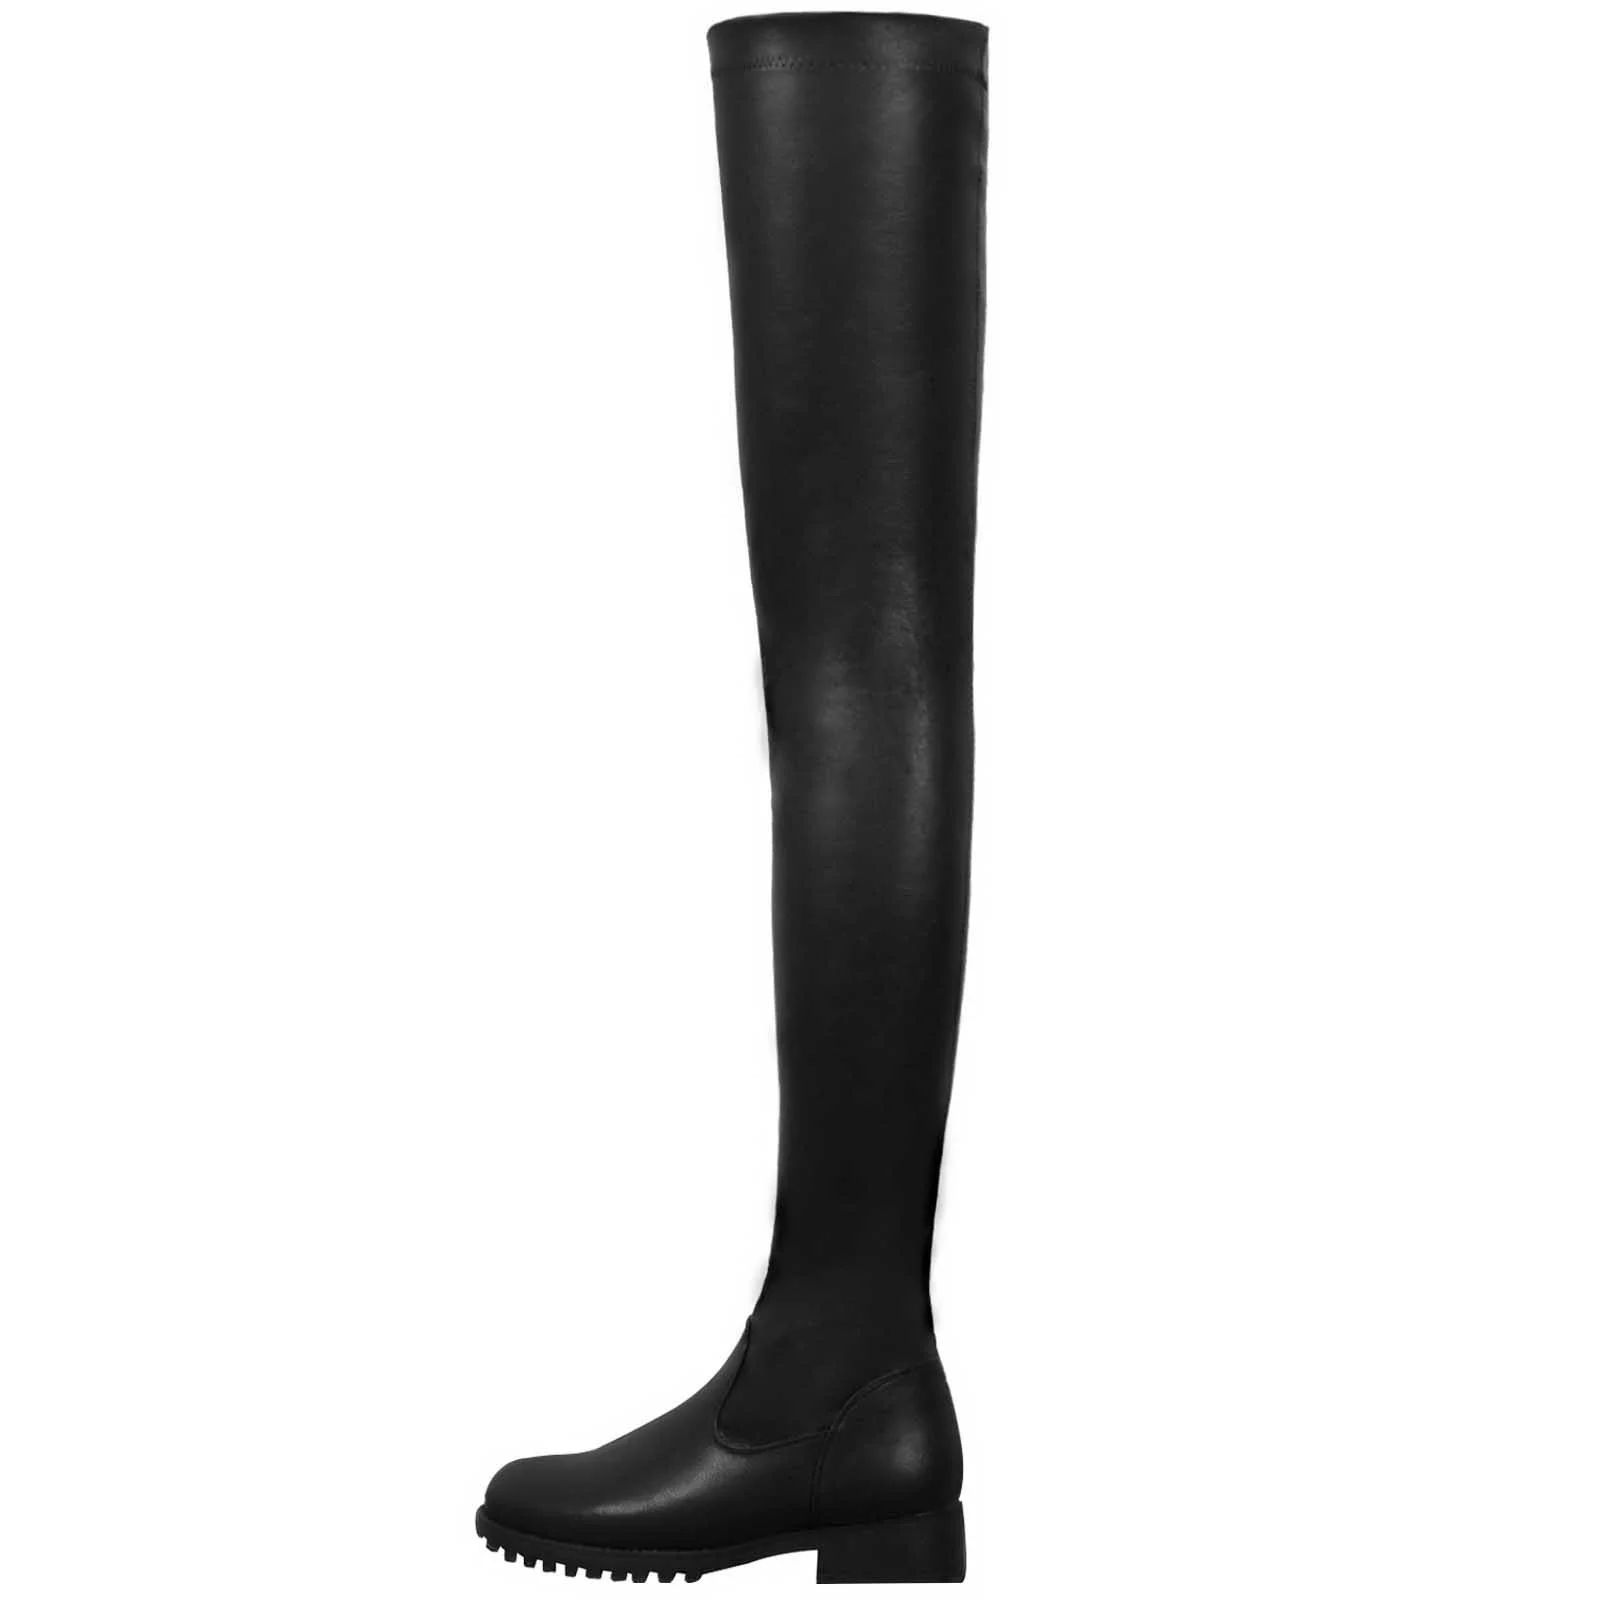 Tuscom thigh high boots,black leather boots,Women Autumn Long Tube Low Heeled Shoes Boots Knight ... | Walmart (US)